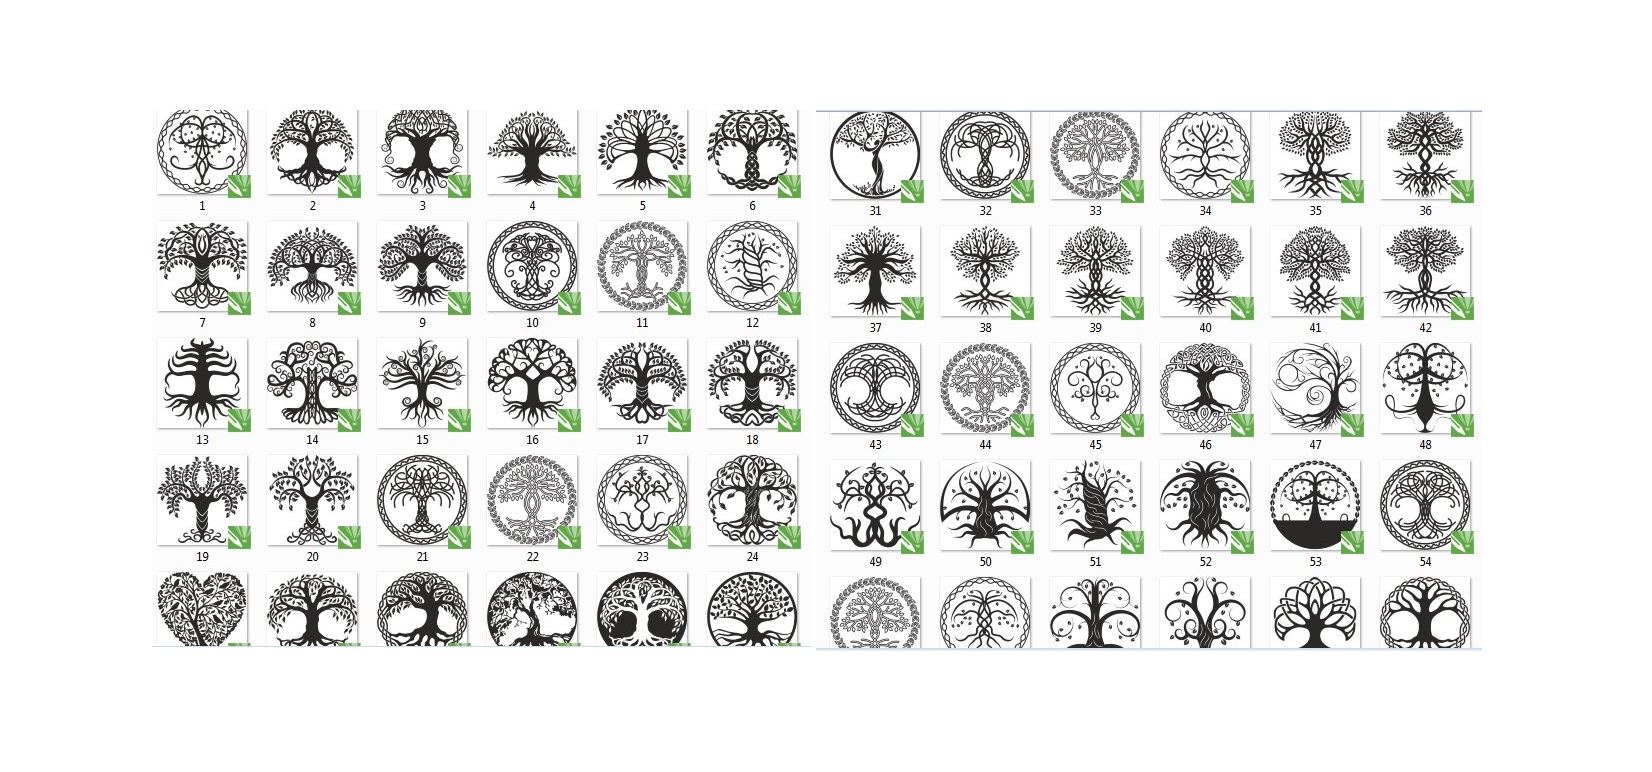 dxf File "Tree of Life" 